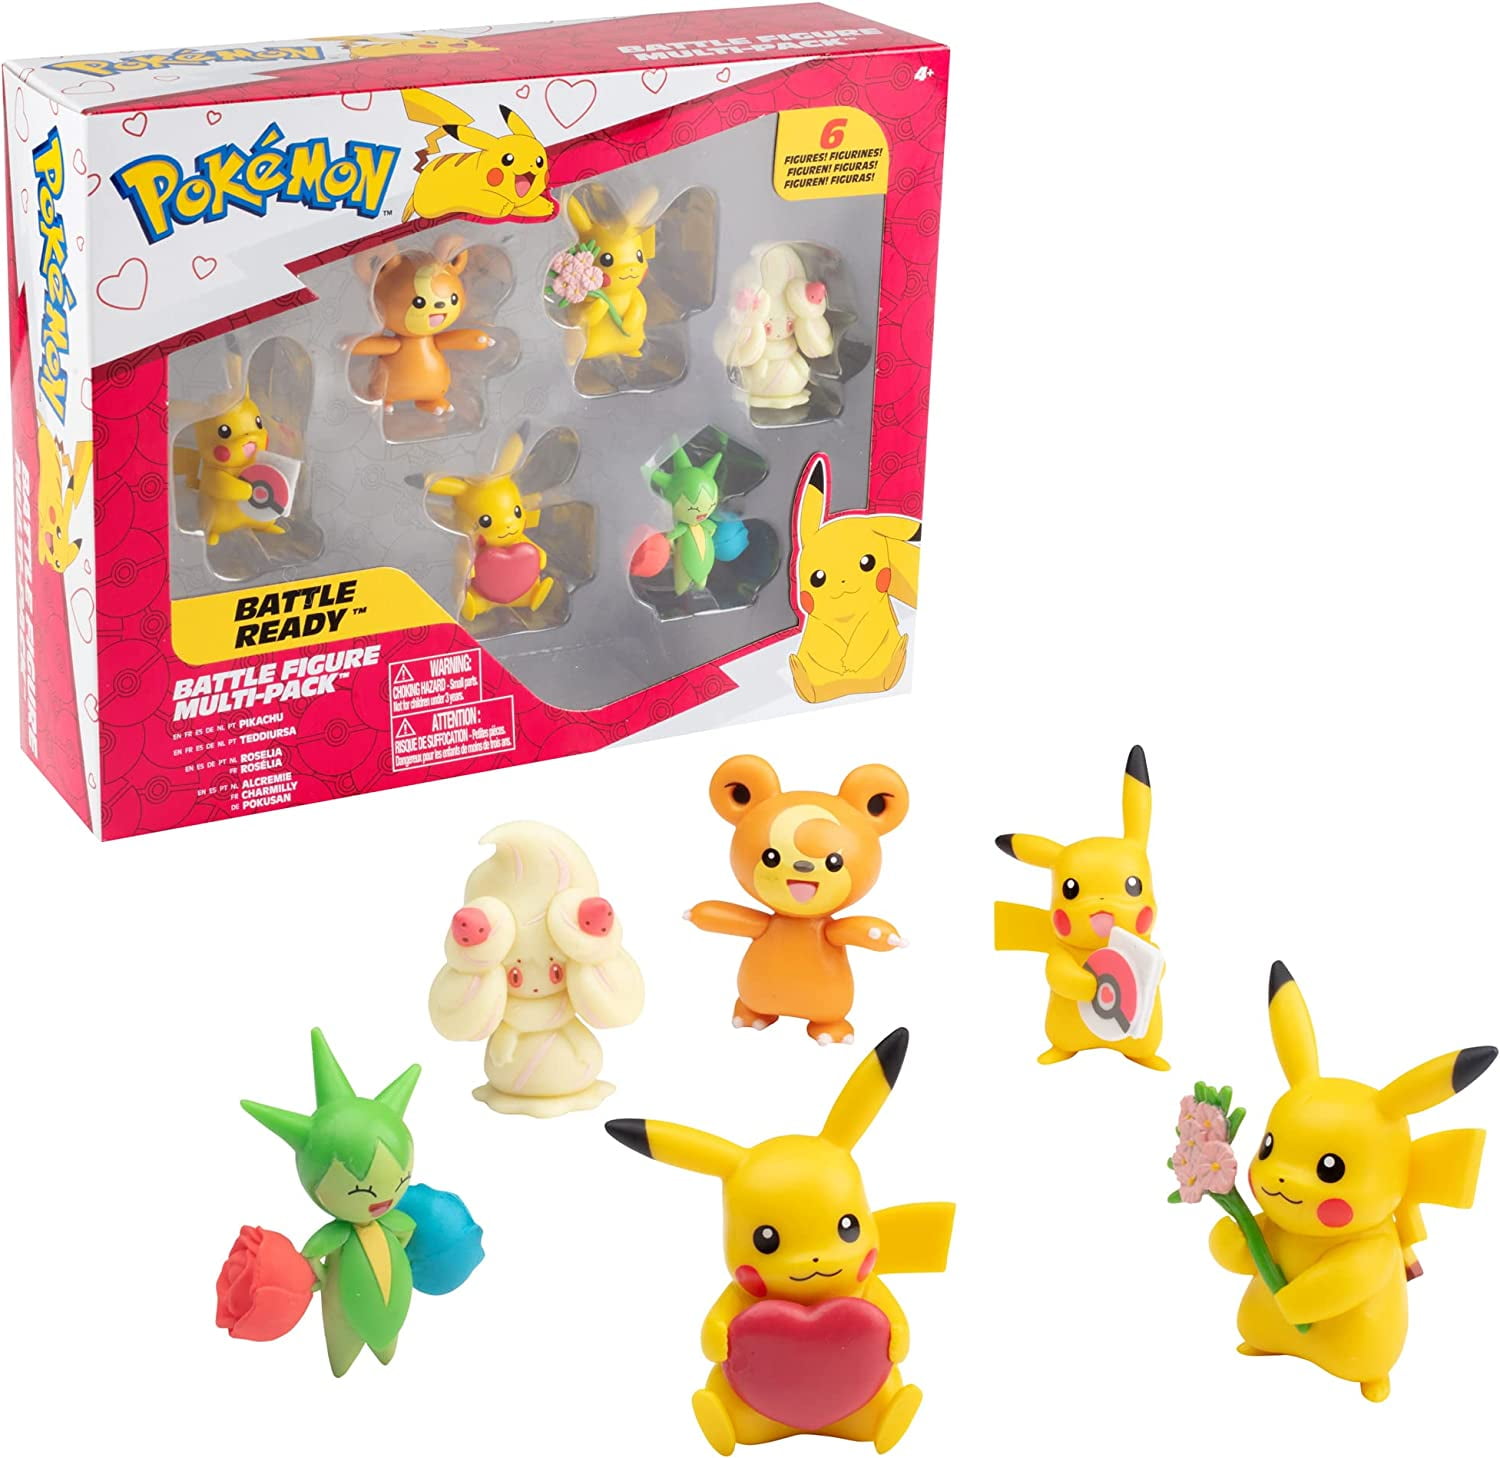 Pokemon Battle Figure Pack Toy Set, 6 Pieces - Collectible Love Edition - 3  Pikachu, Teddiursa, Alcremie & Roselia - Officially Licensed - Gift for  Kids